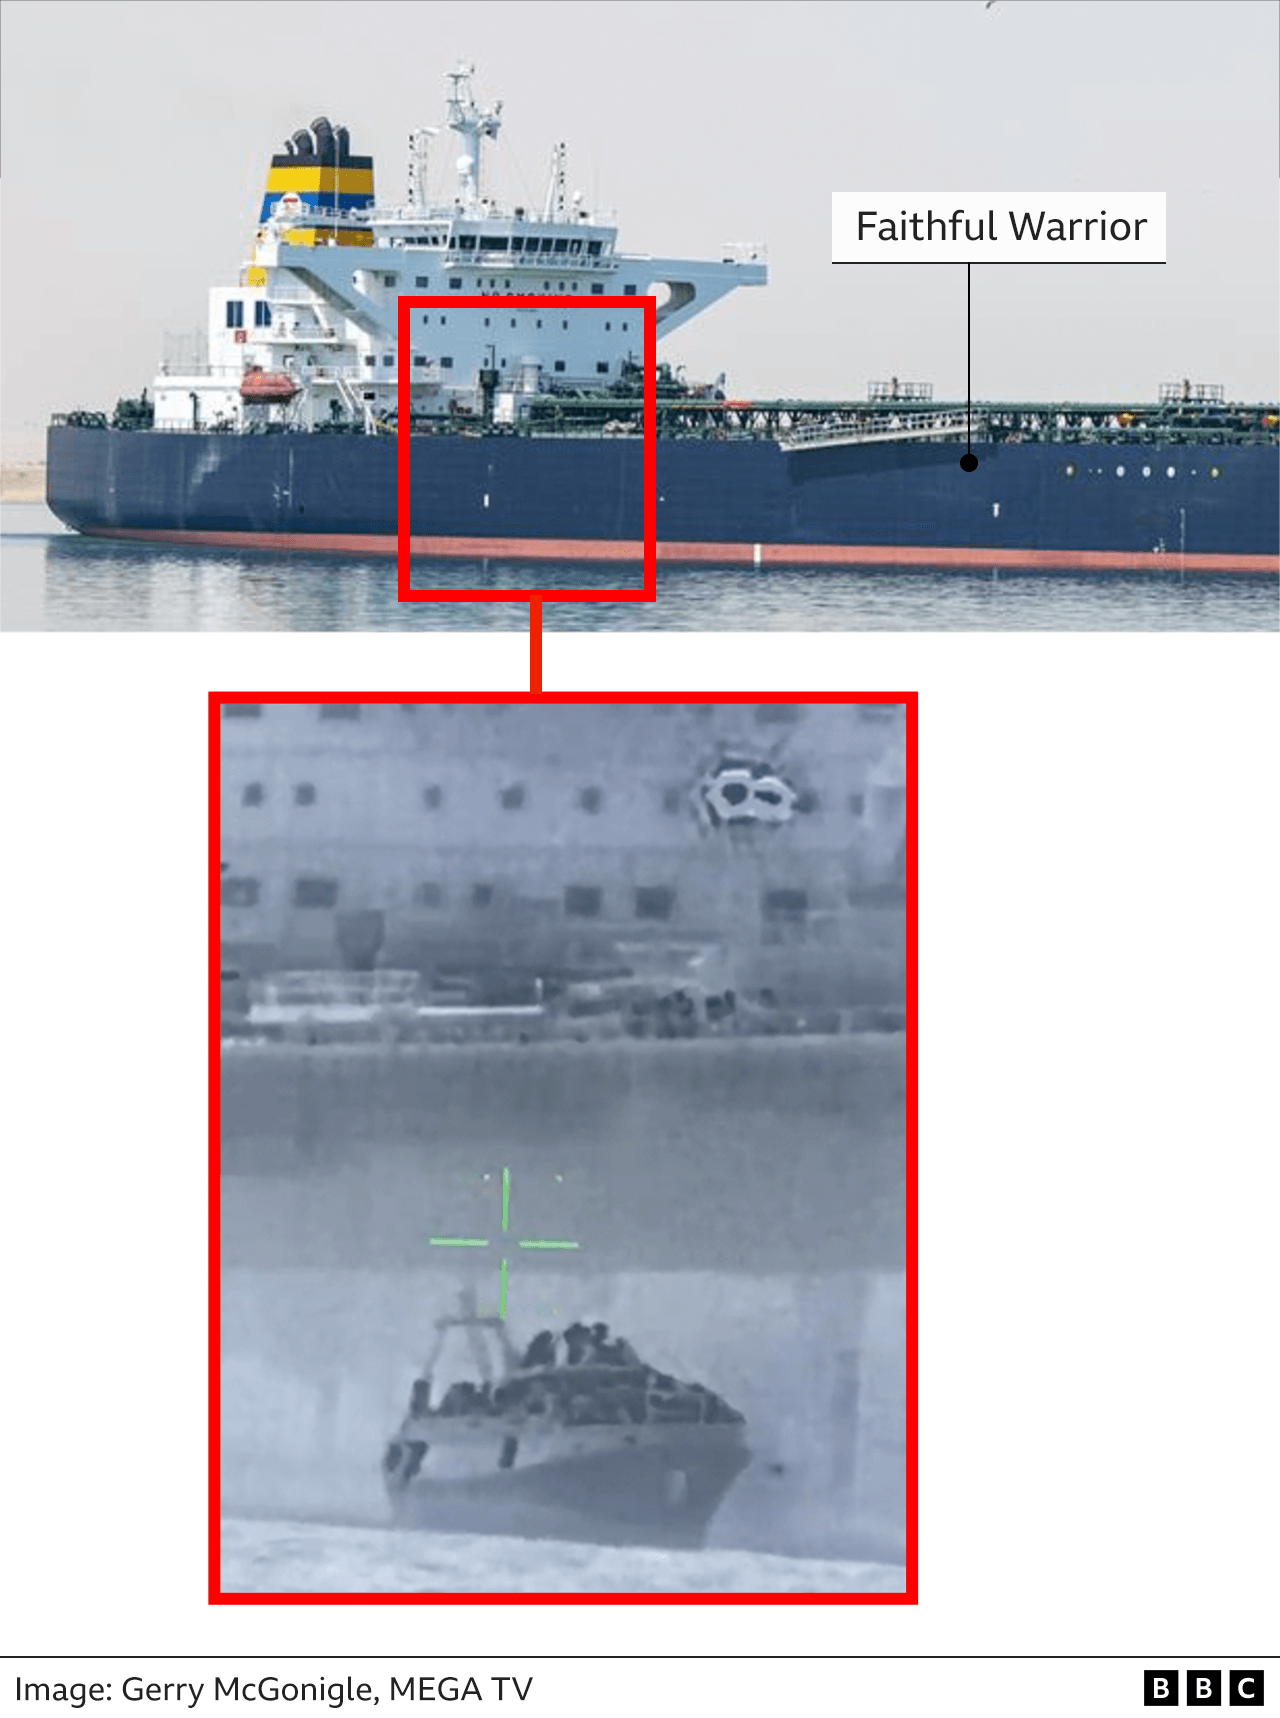 An infographic showing a still from a video of the migrant boat with the Faithful Warrior visible behind. Another clear image of the Faithful Warrior demonstrates it is indeed the ship that can be seen in the background of the video.